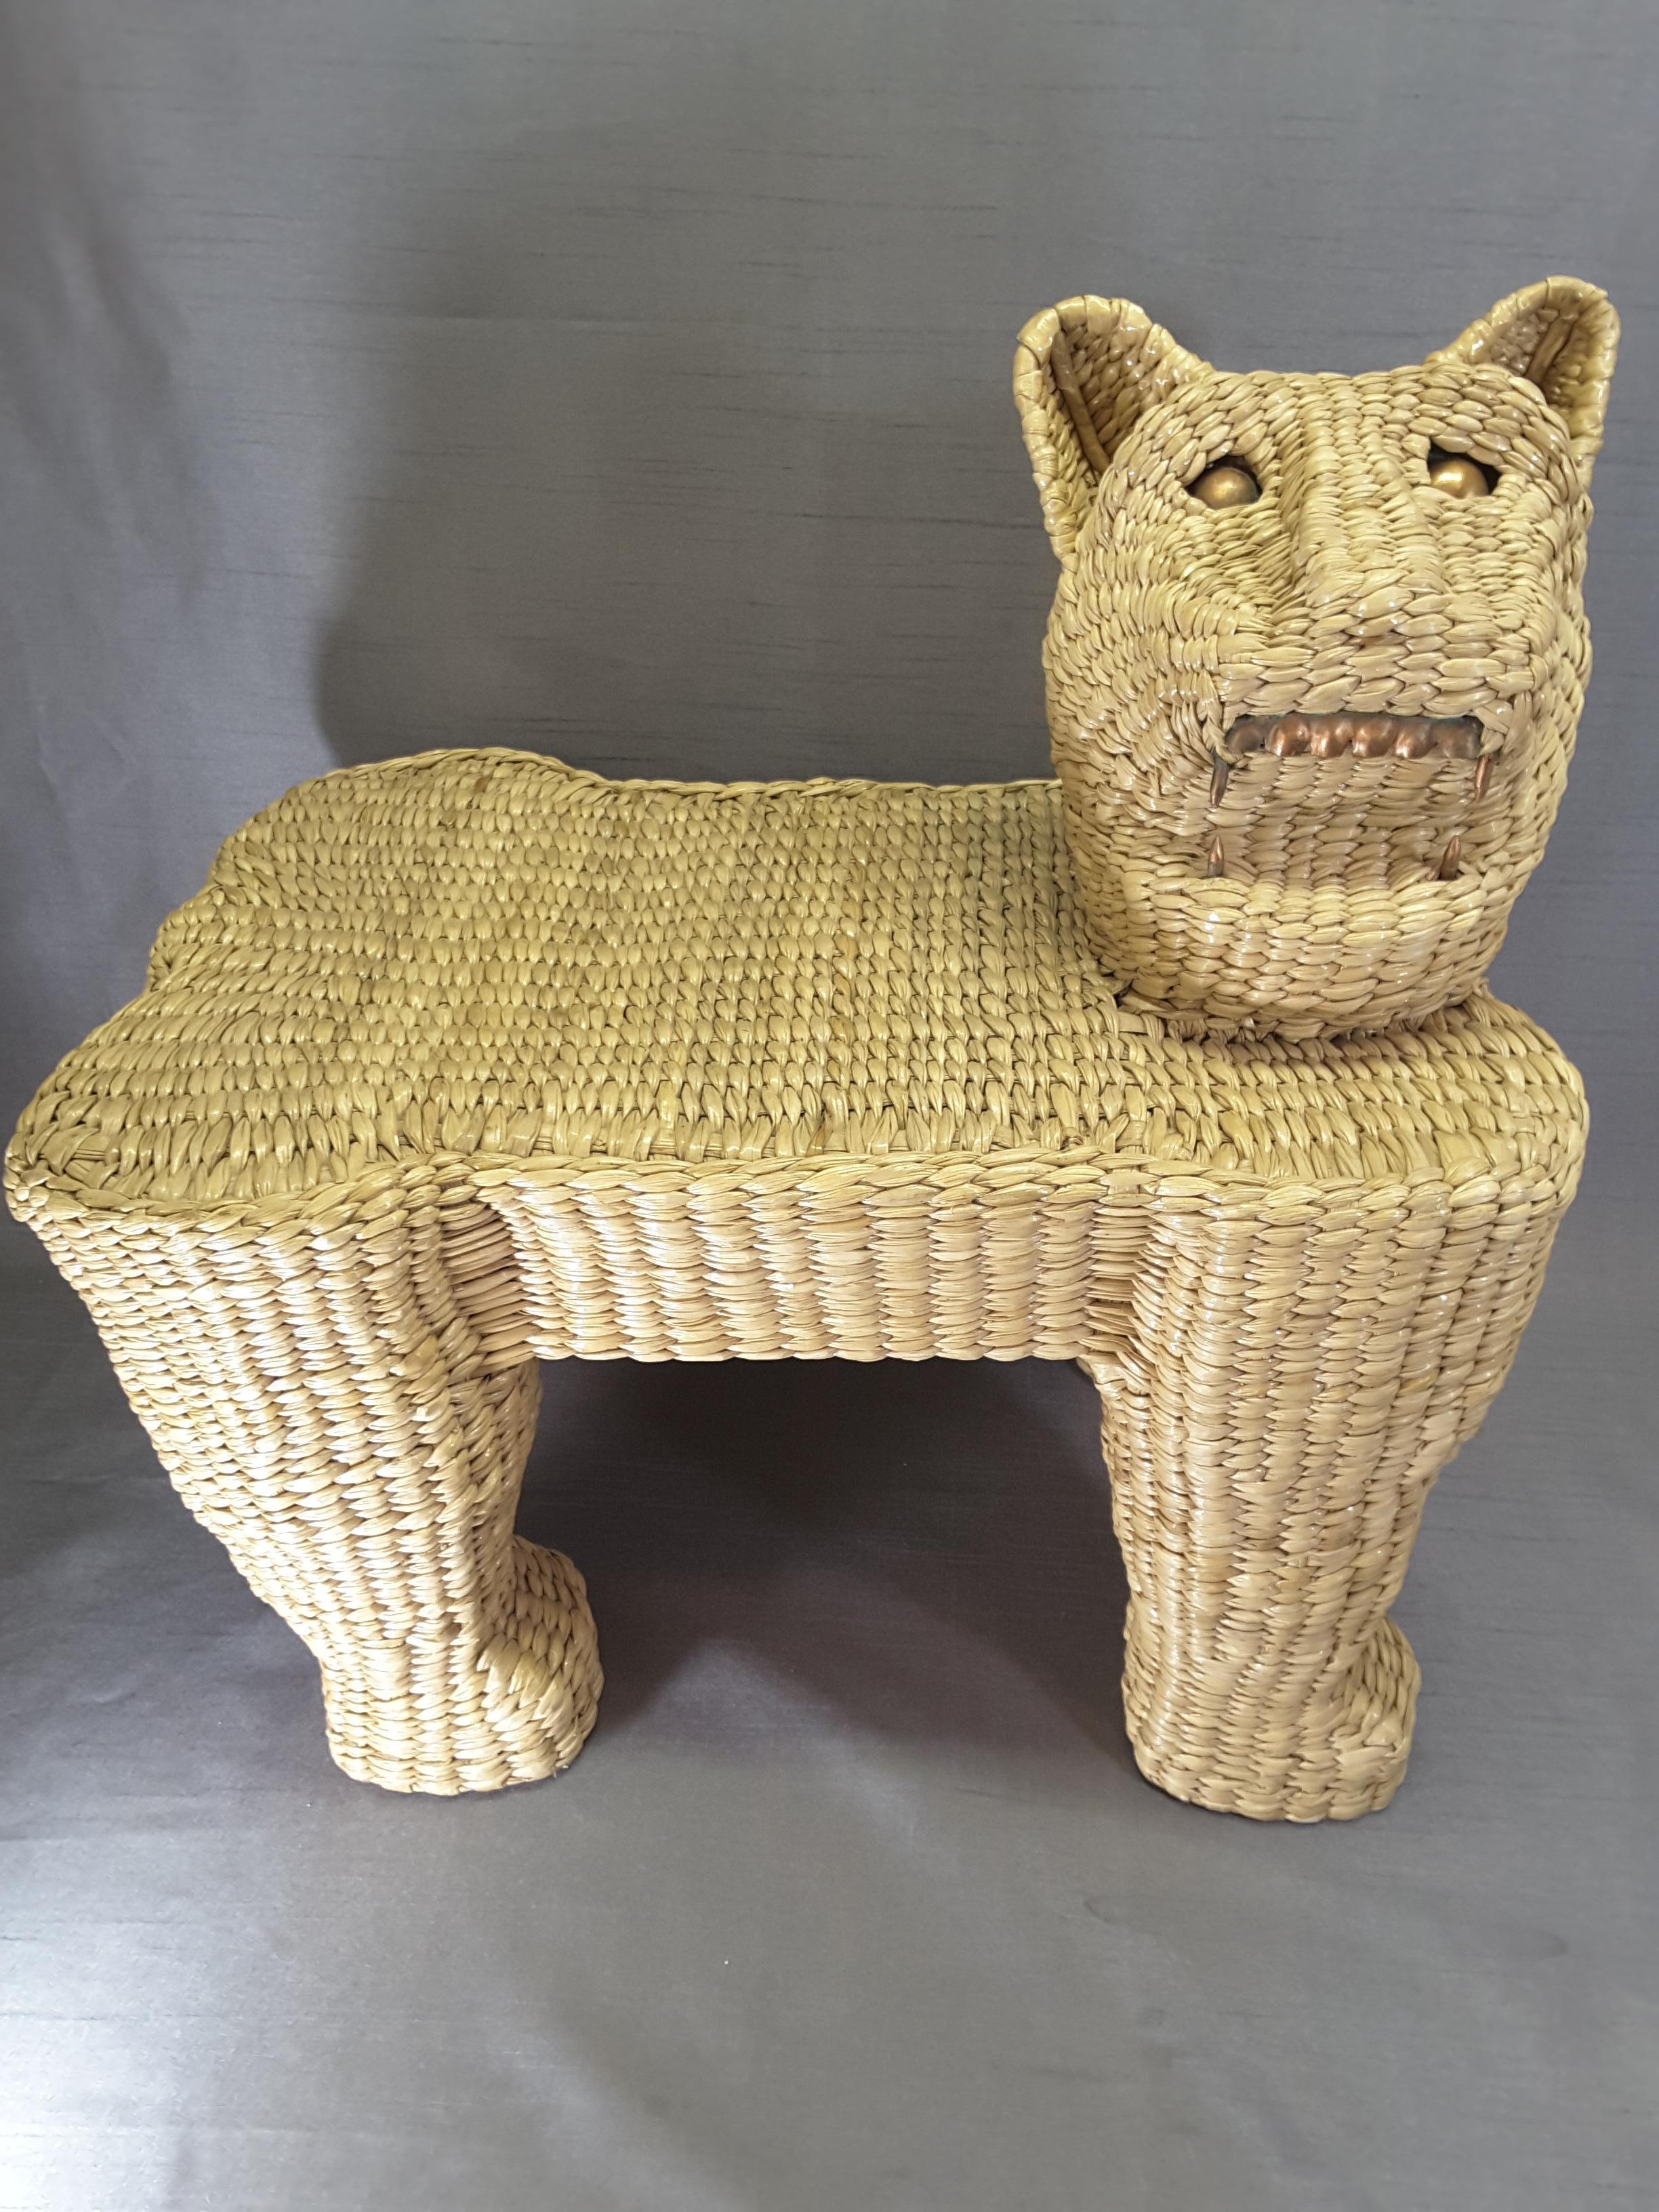 Mario Lopez Torres Wicker Panther Stool, Early 1970s For Sale 9